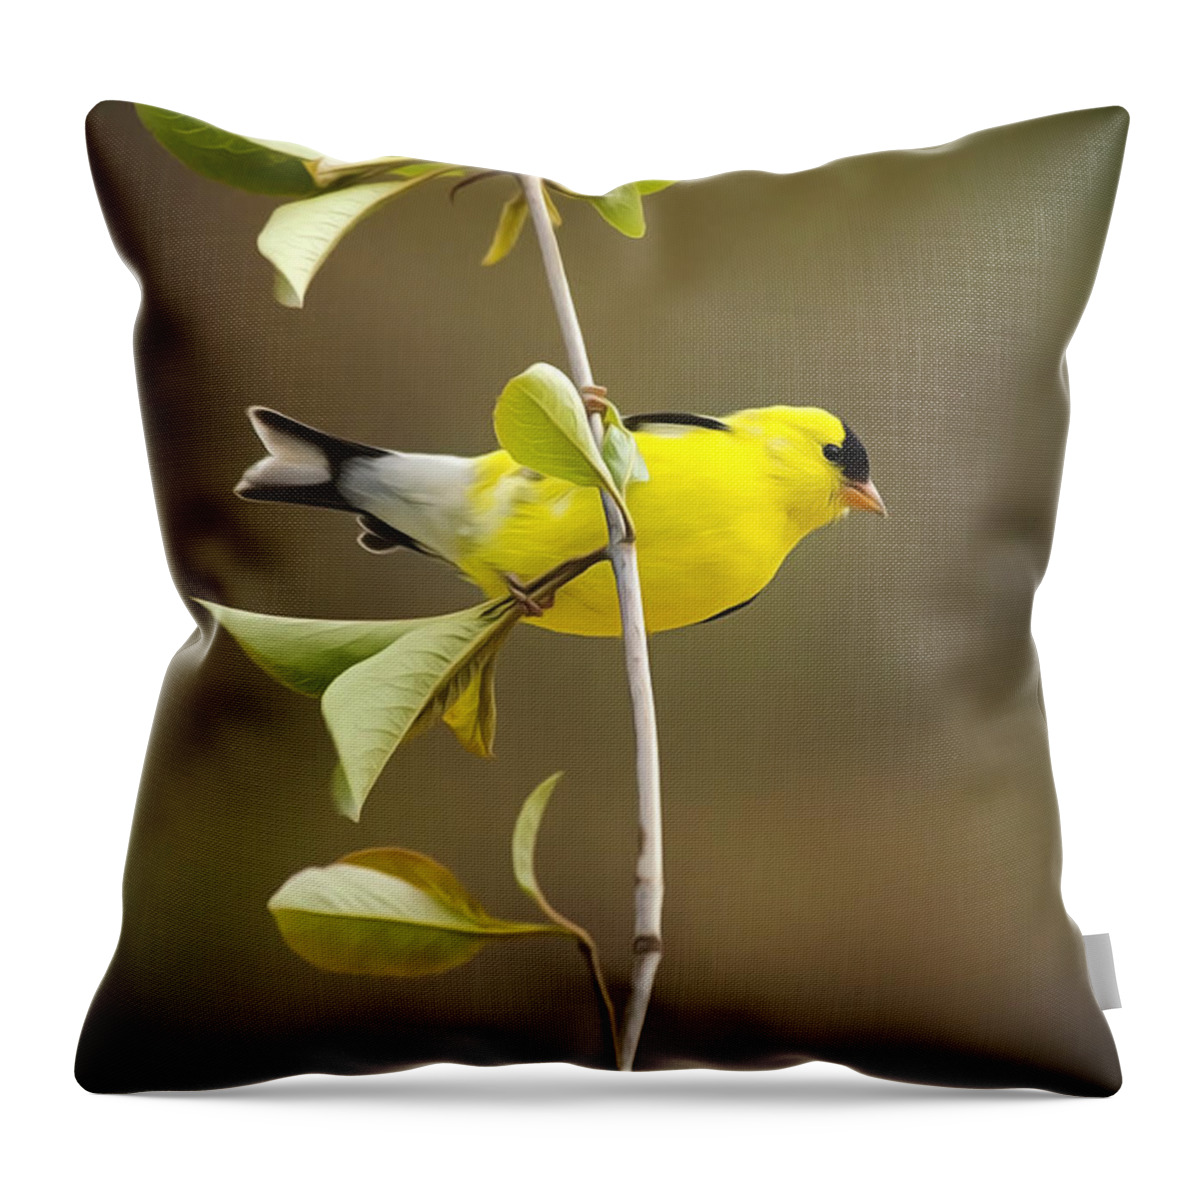 Goldfinch Throw Pillow featuring the painting American Goldfinch by Christina Rollo